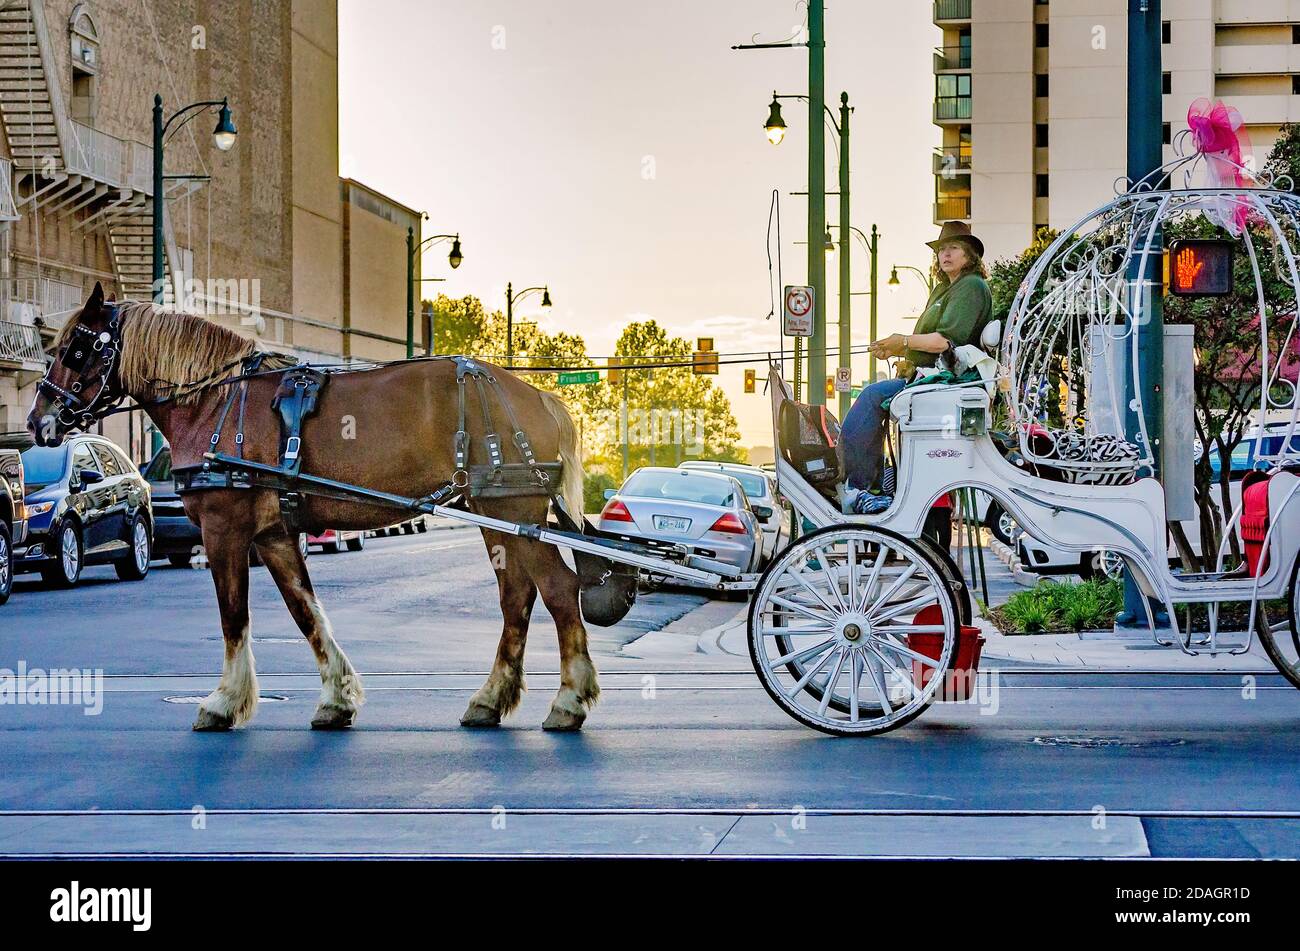 A horse-drawn carriage carries tourists down Main Street, Sept. 12, 2015, in Memphis, Tennessee. The street features 1.8 miles of restaurants, nightcl Stock Photo